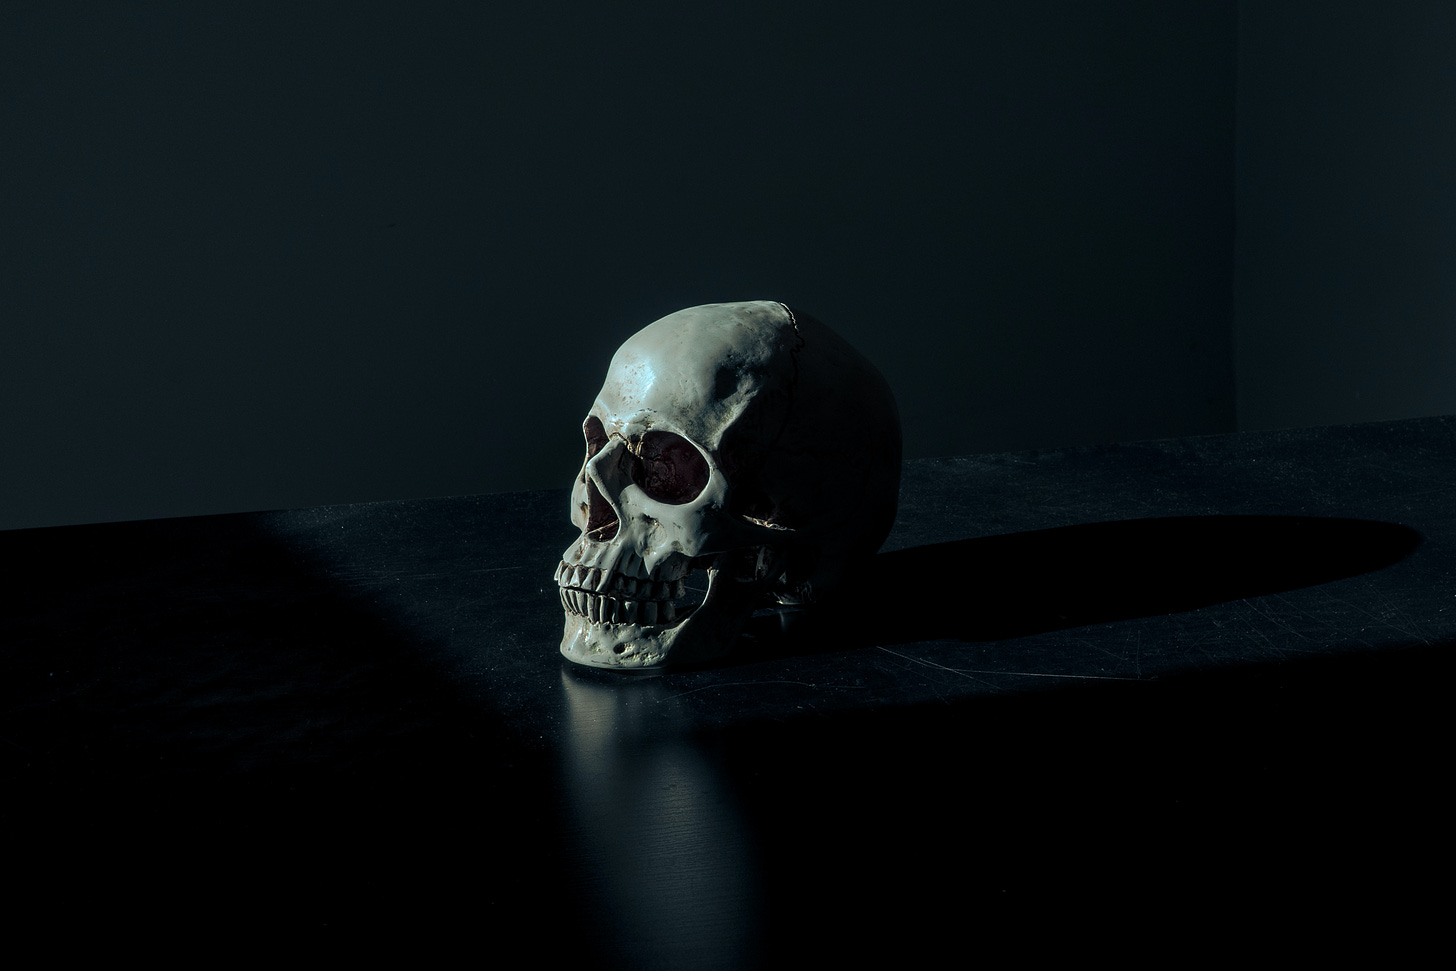 A skull sits on a surface against a black background.